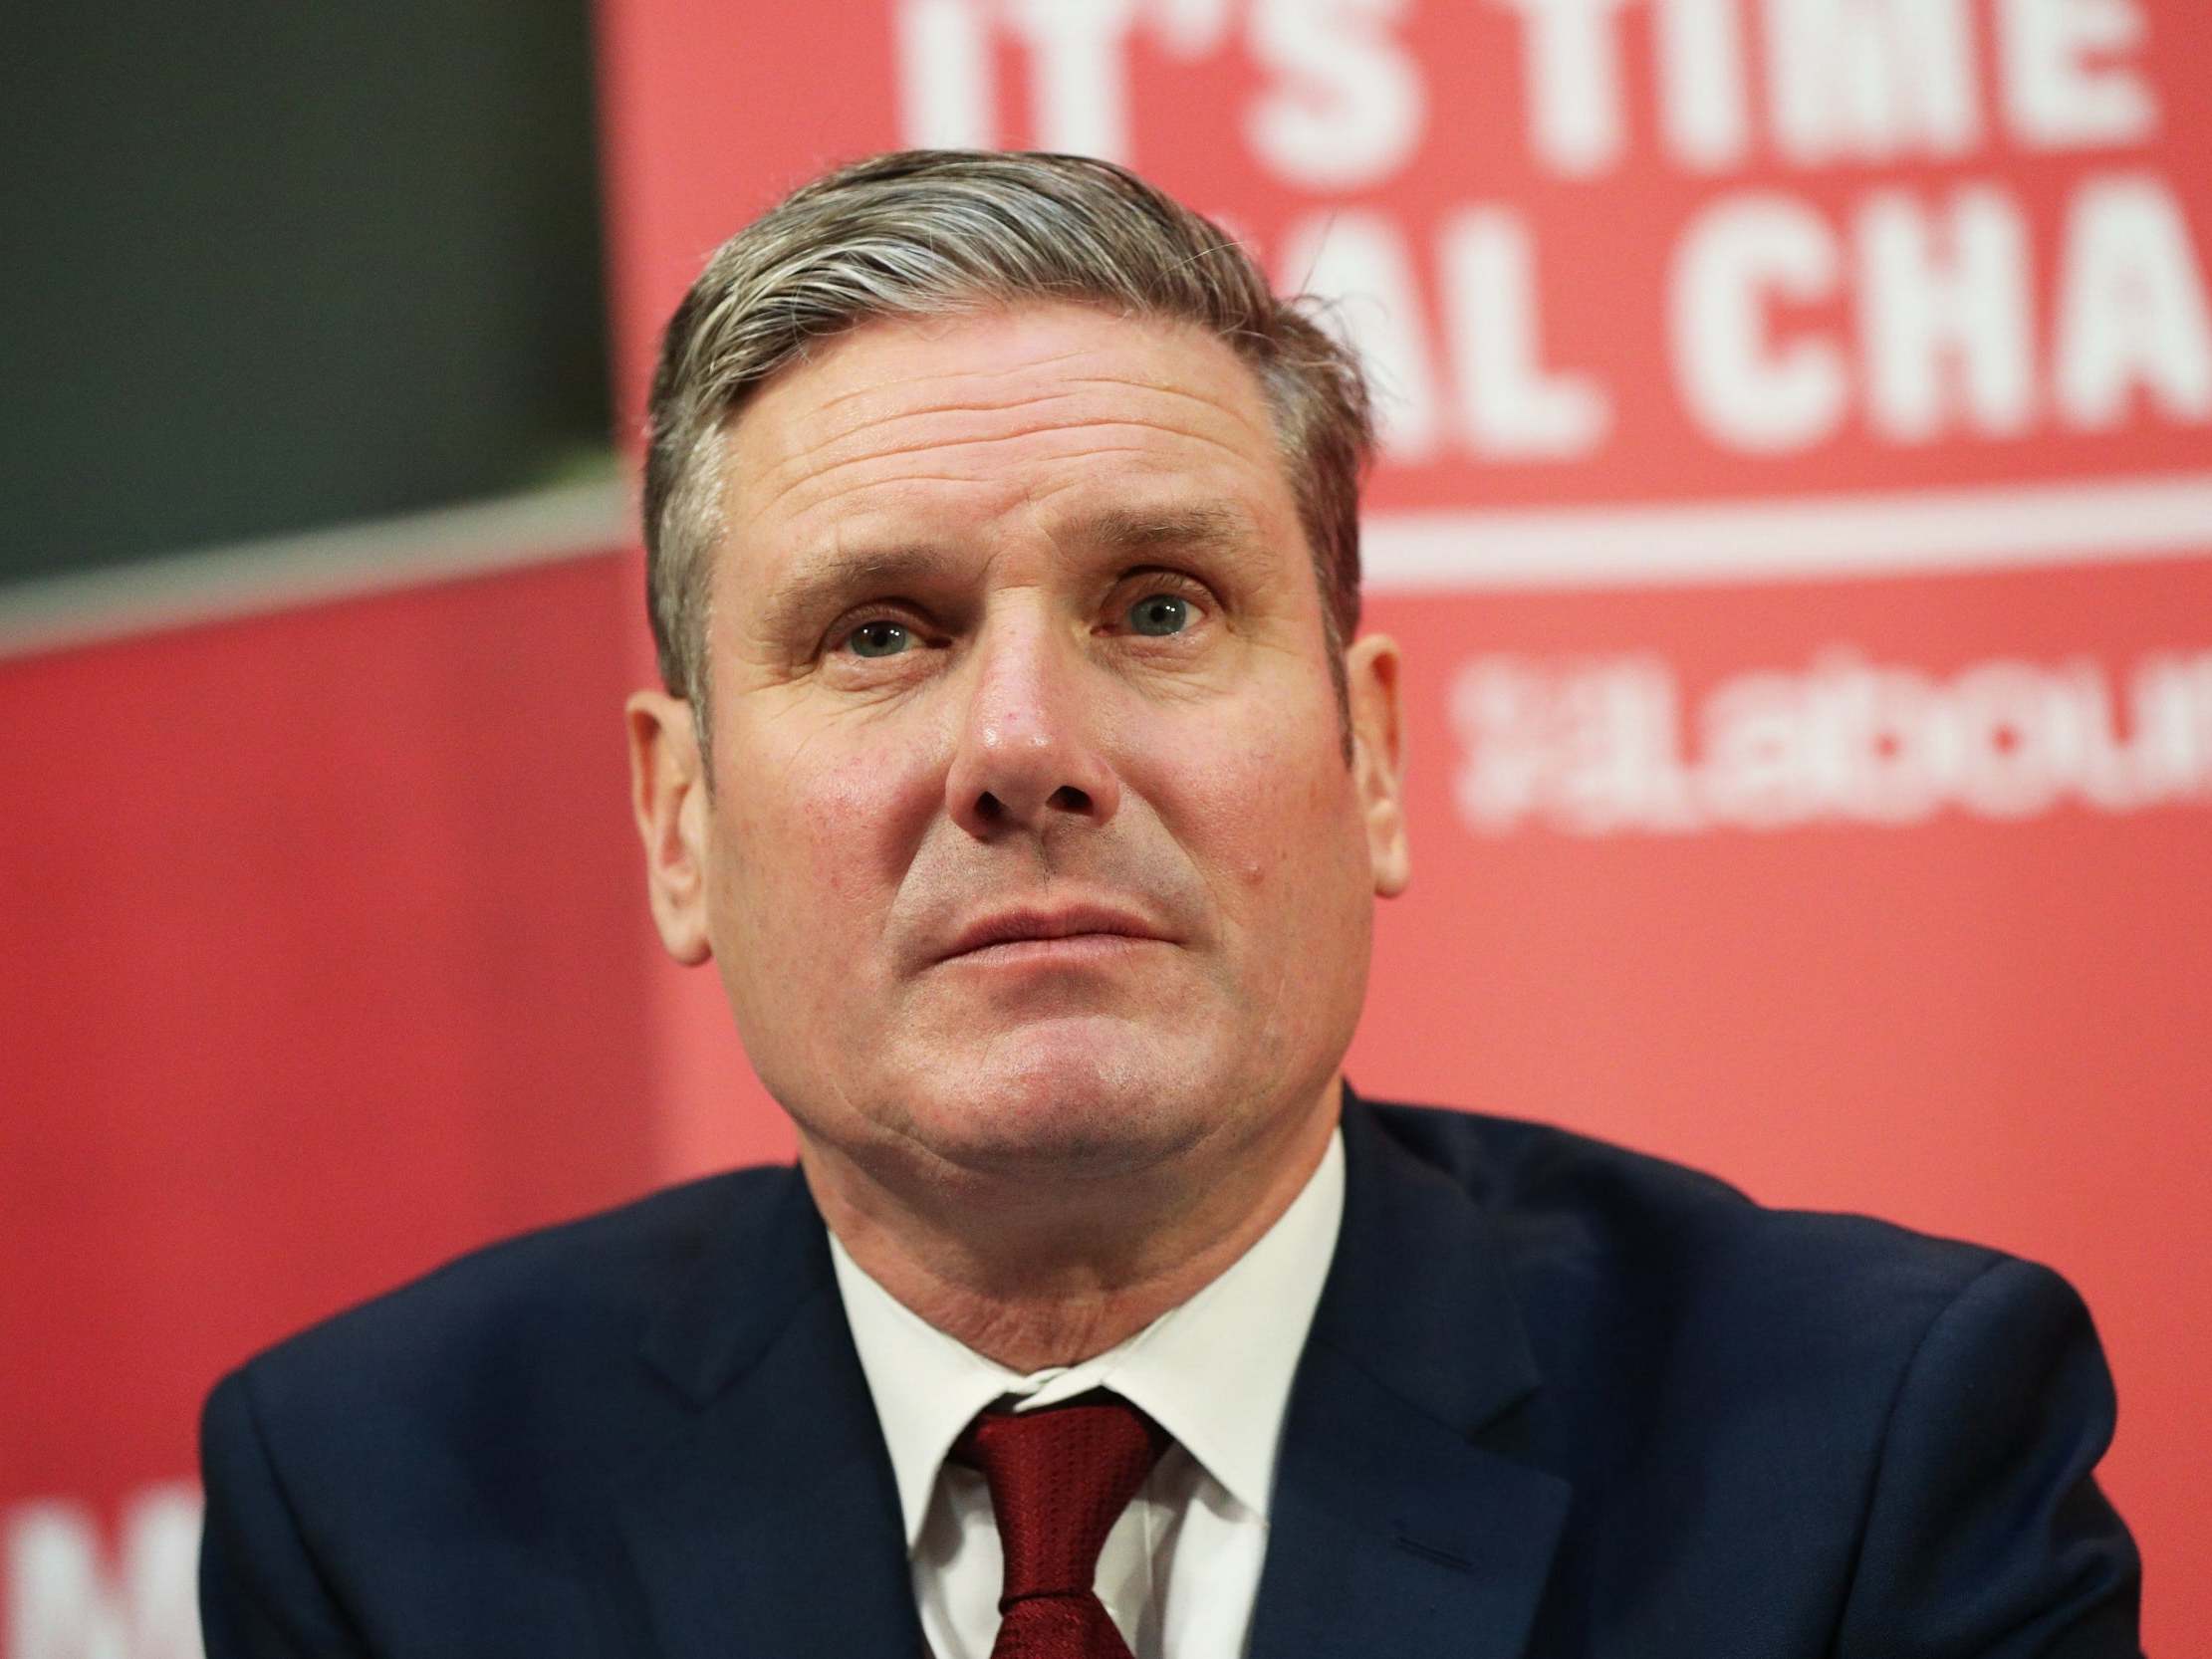 The YouGov poll may show Keir Starmer with a commanding lead over potential rivals to succeed Corbyn, but can it be trusted?